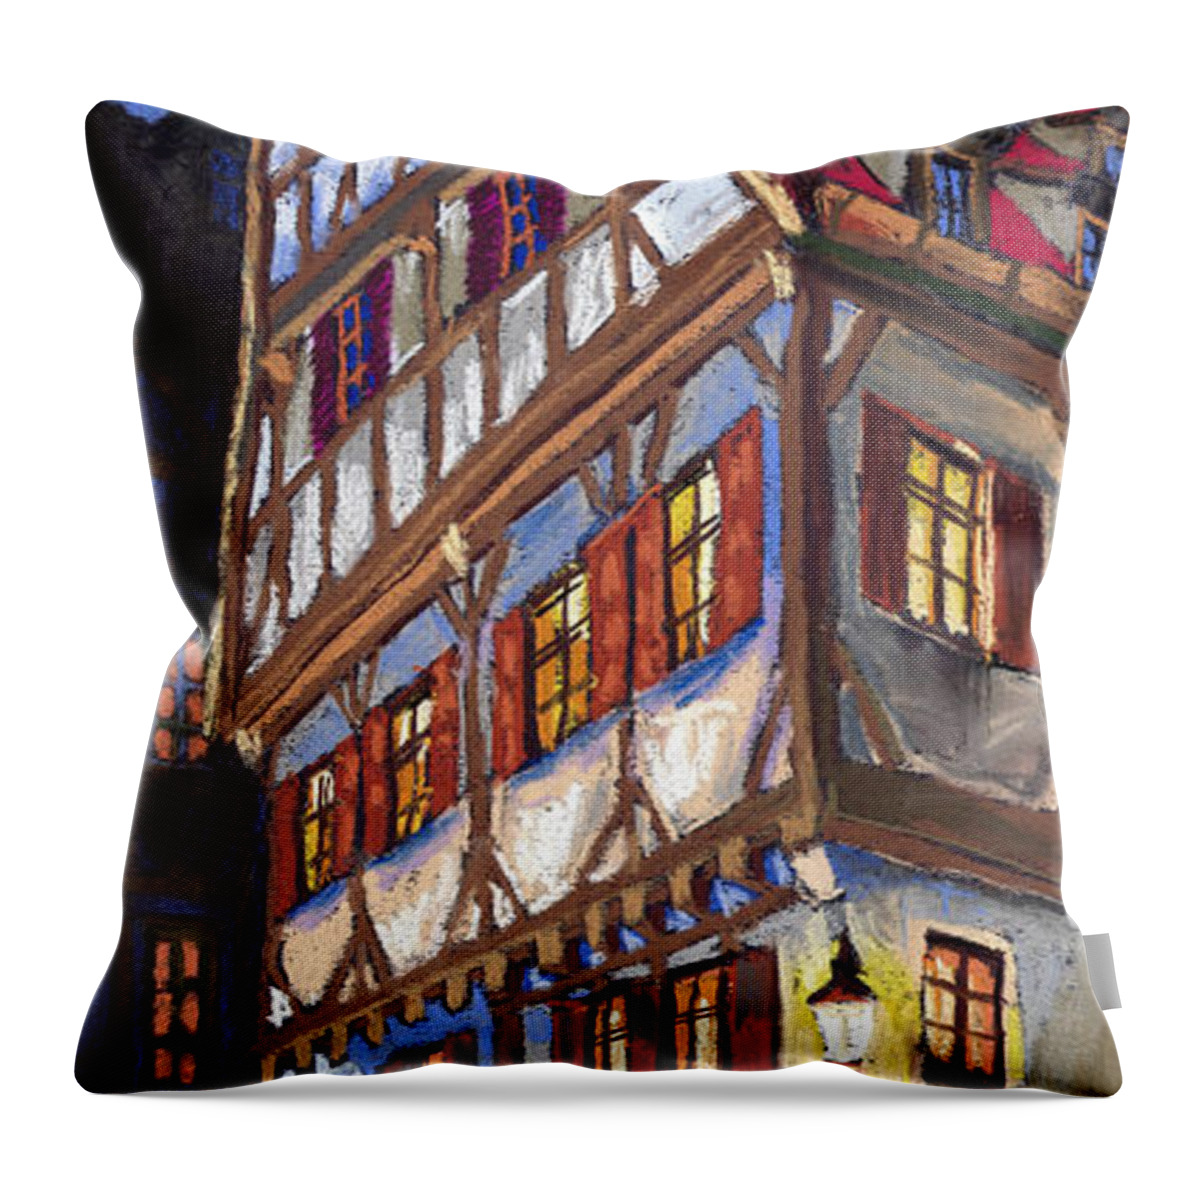 Pastel Throw Pillow featuring the painting Germany Ulm Old Street by Yuriy Shevchuk